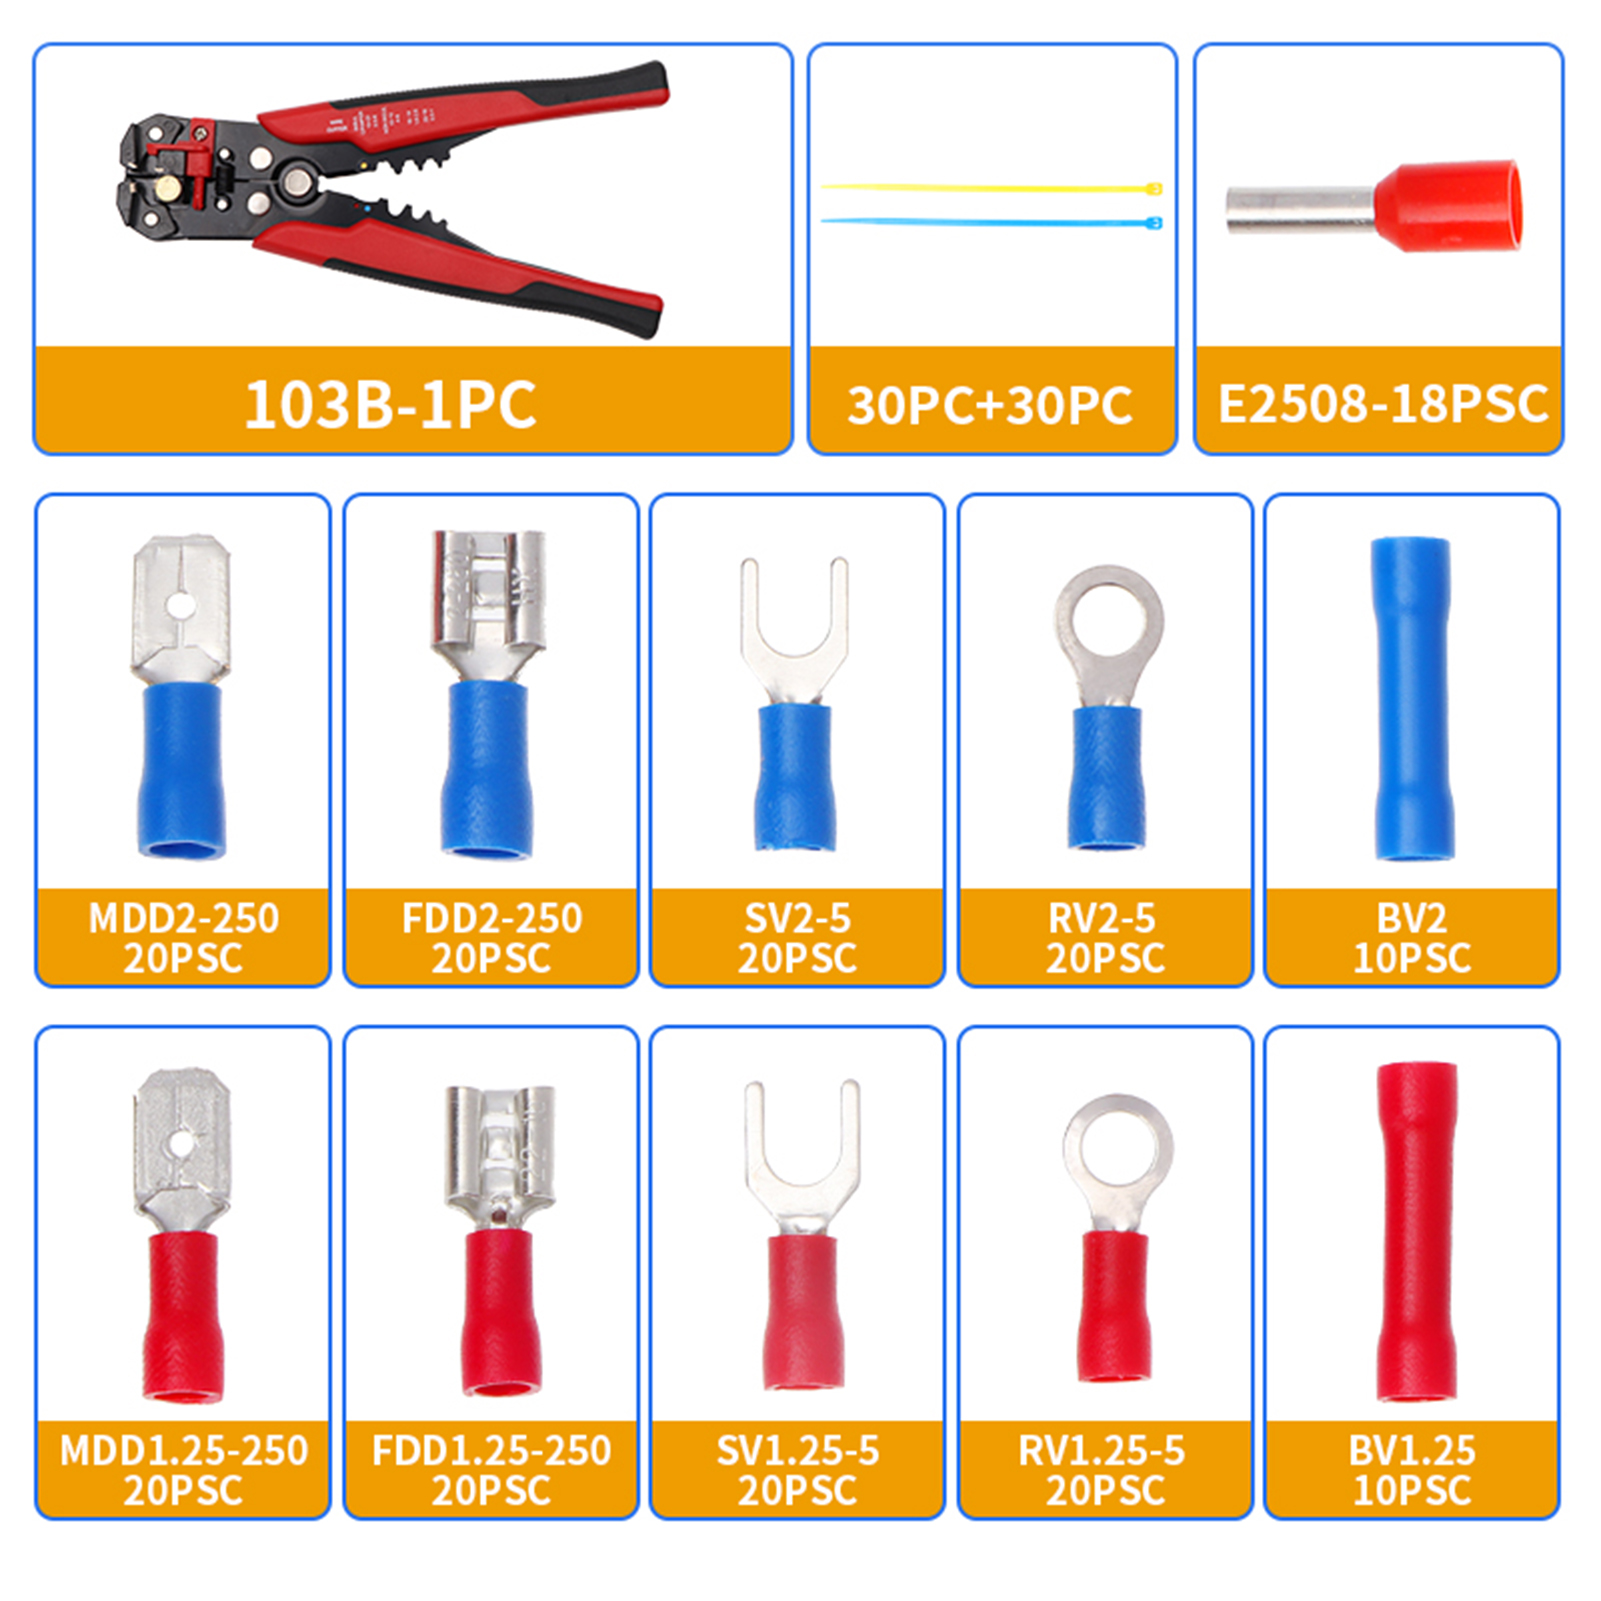 260PCS-Crimp-Cable-Terminals-Set-Kit-Heat-Shrink-Insulated-Wire-Electrical-Connector-Assorted-Box-wi-1918948-10